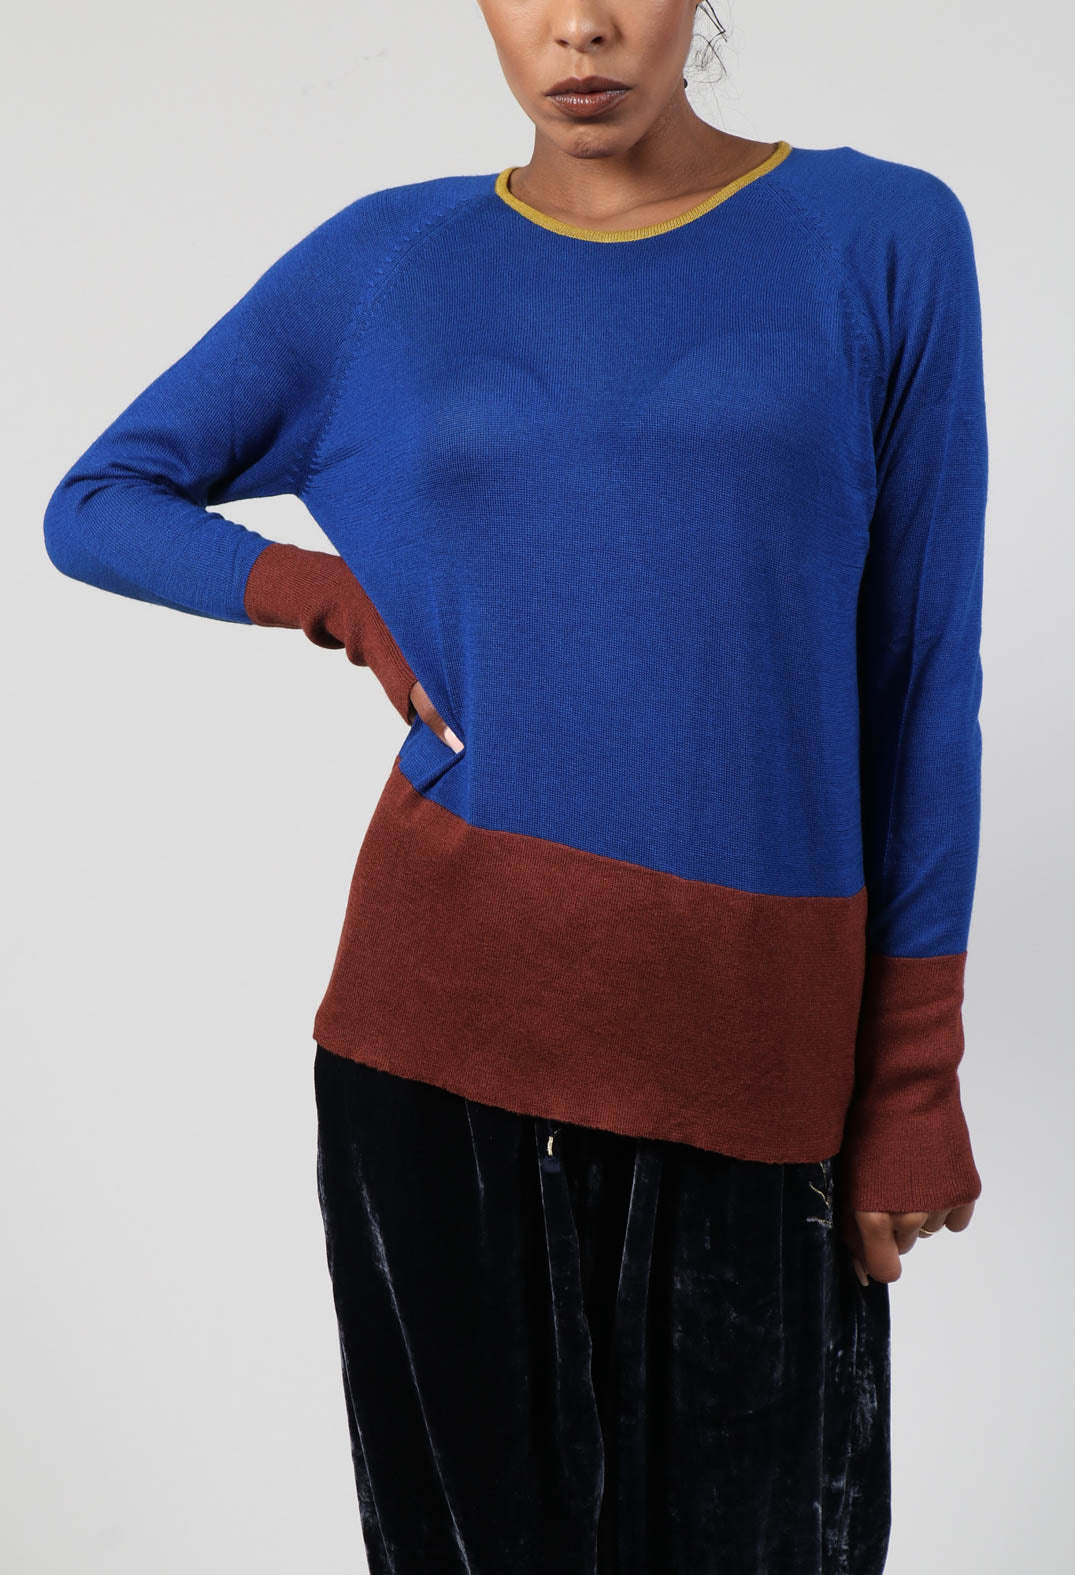 Top Key Round Neck in Sapphire and Cinnamon